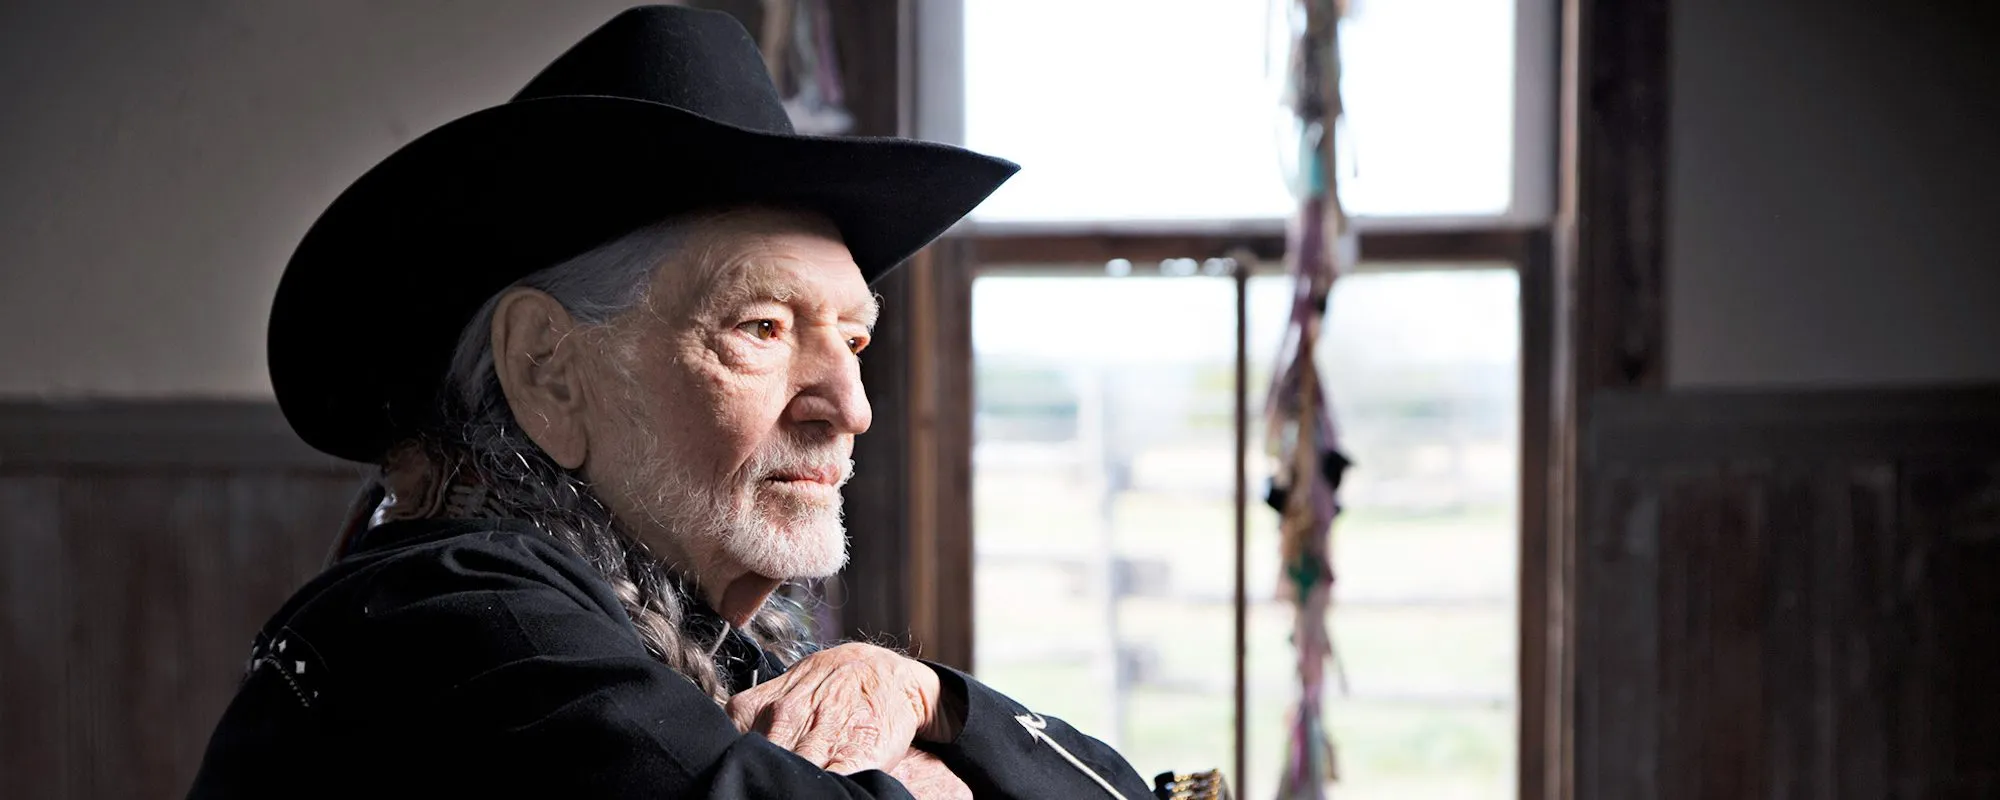 Willie Nelson Shares New Rendition of Kris Kristofferson’s “Why Me”